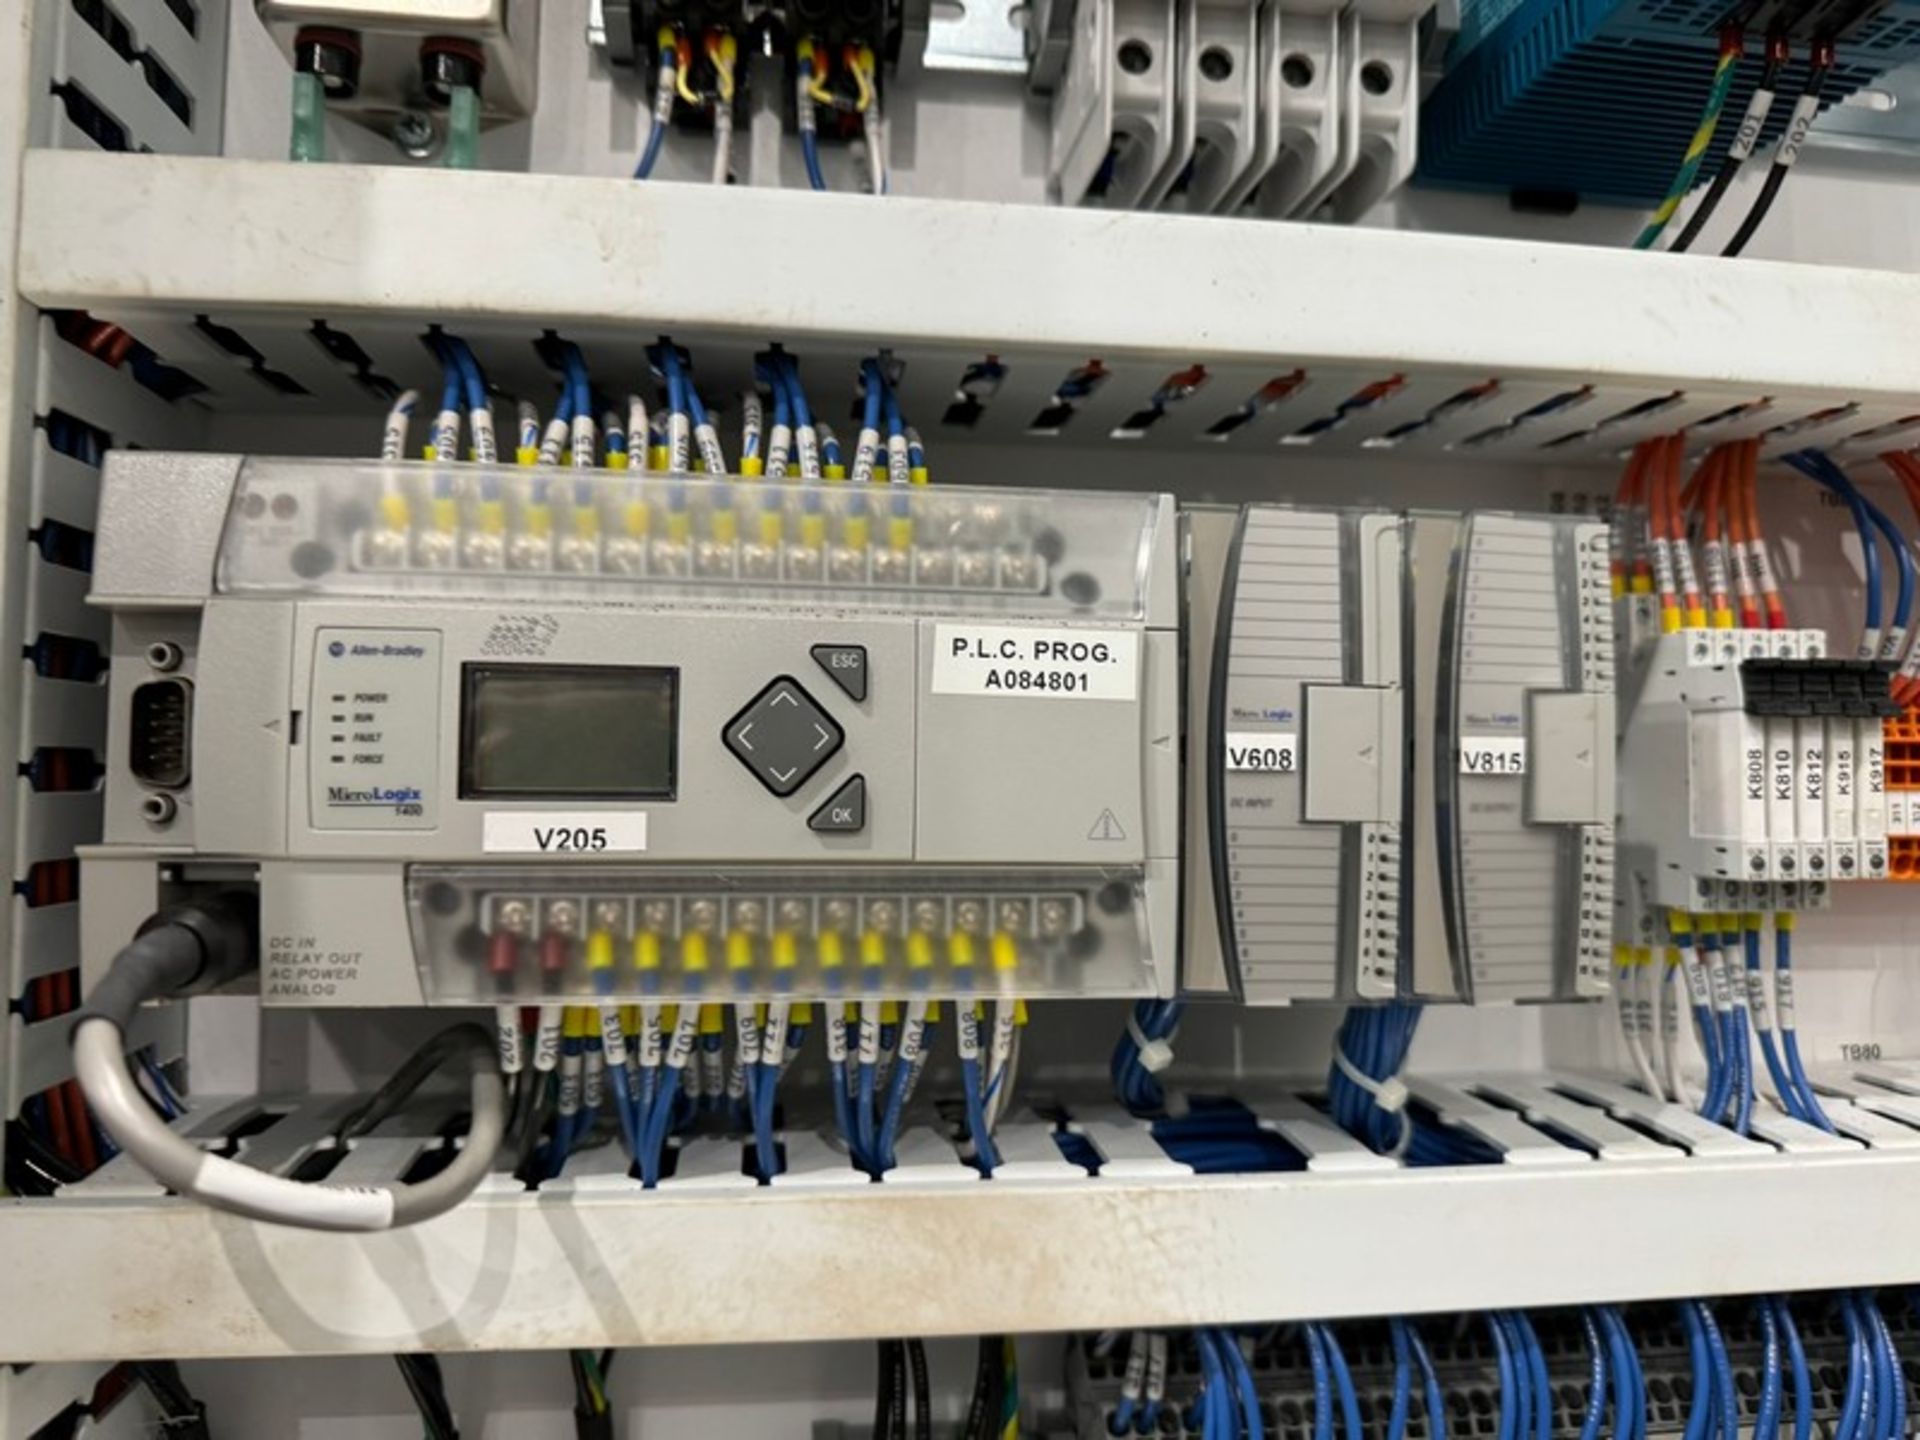 2019 Butler Automatic Inc. Splicer, M/N SP1-1924-4.5, S/N J-8381, 220 Volts, 1 Phase, S/S Control - Image 8 of 11